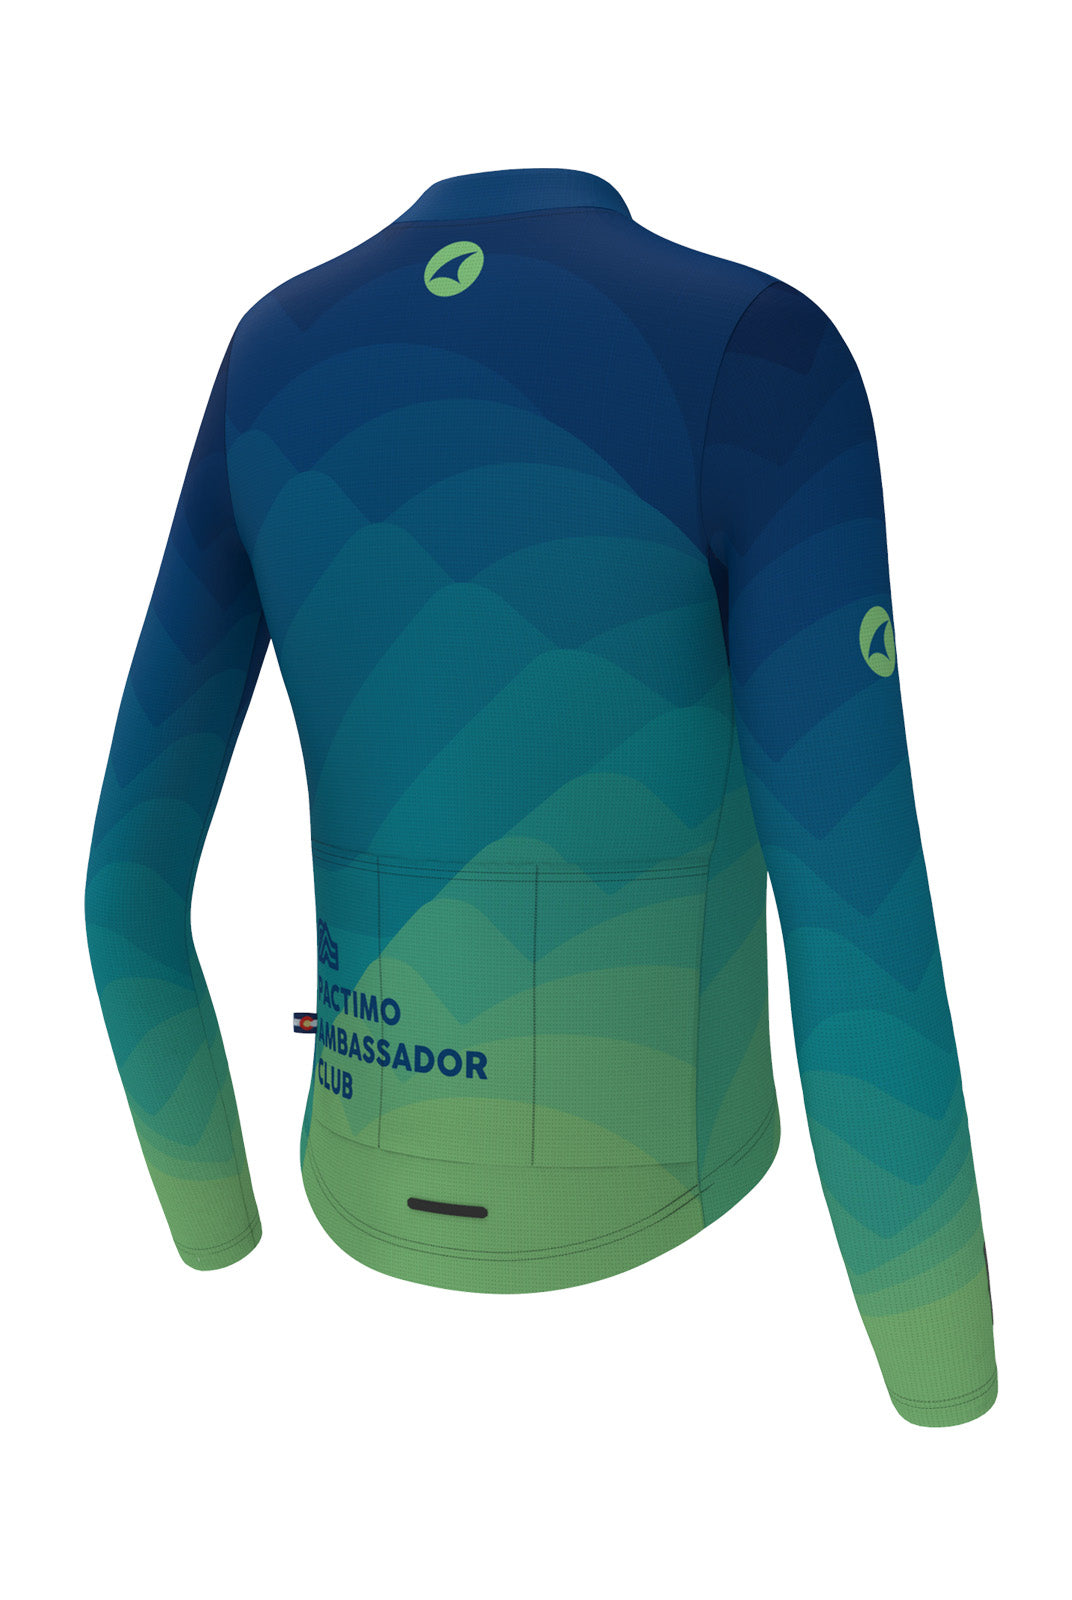 Women's PAC Ascent Aero Long Sleeve Cycling Jersey - Twighlight Back